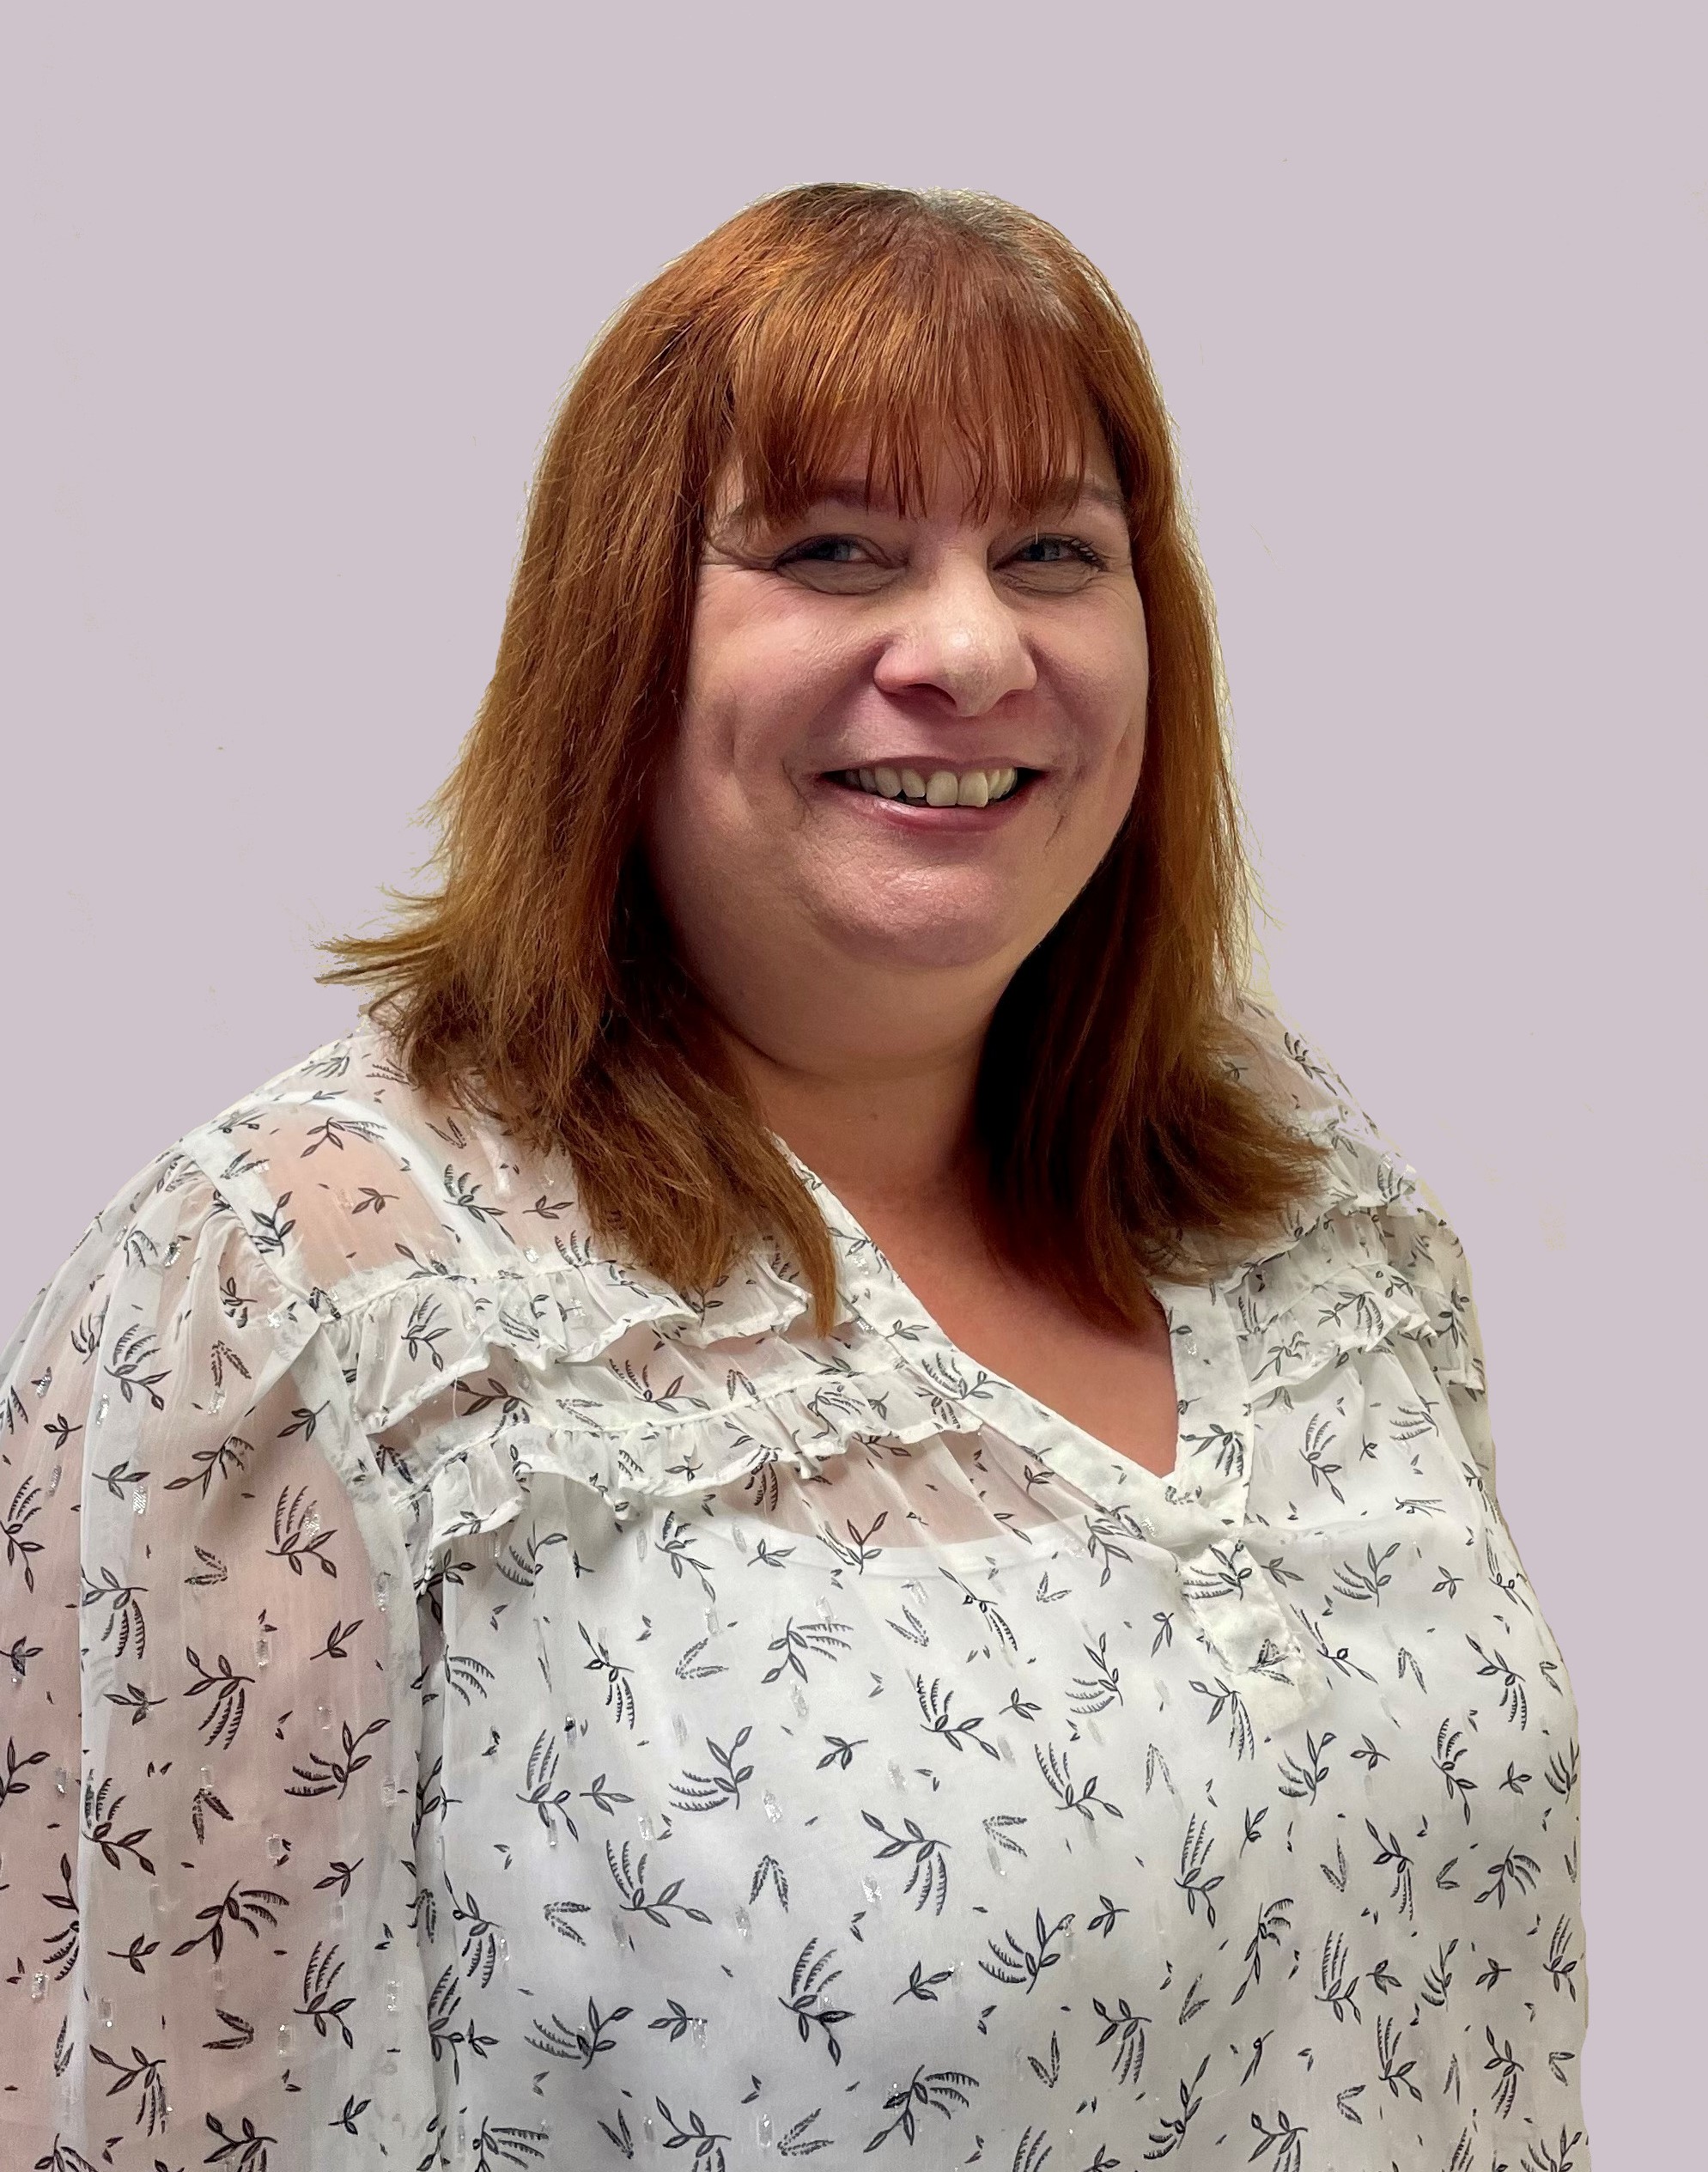 Conveyancing Specialist Joins Residential Property Team